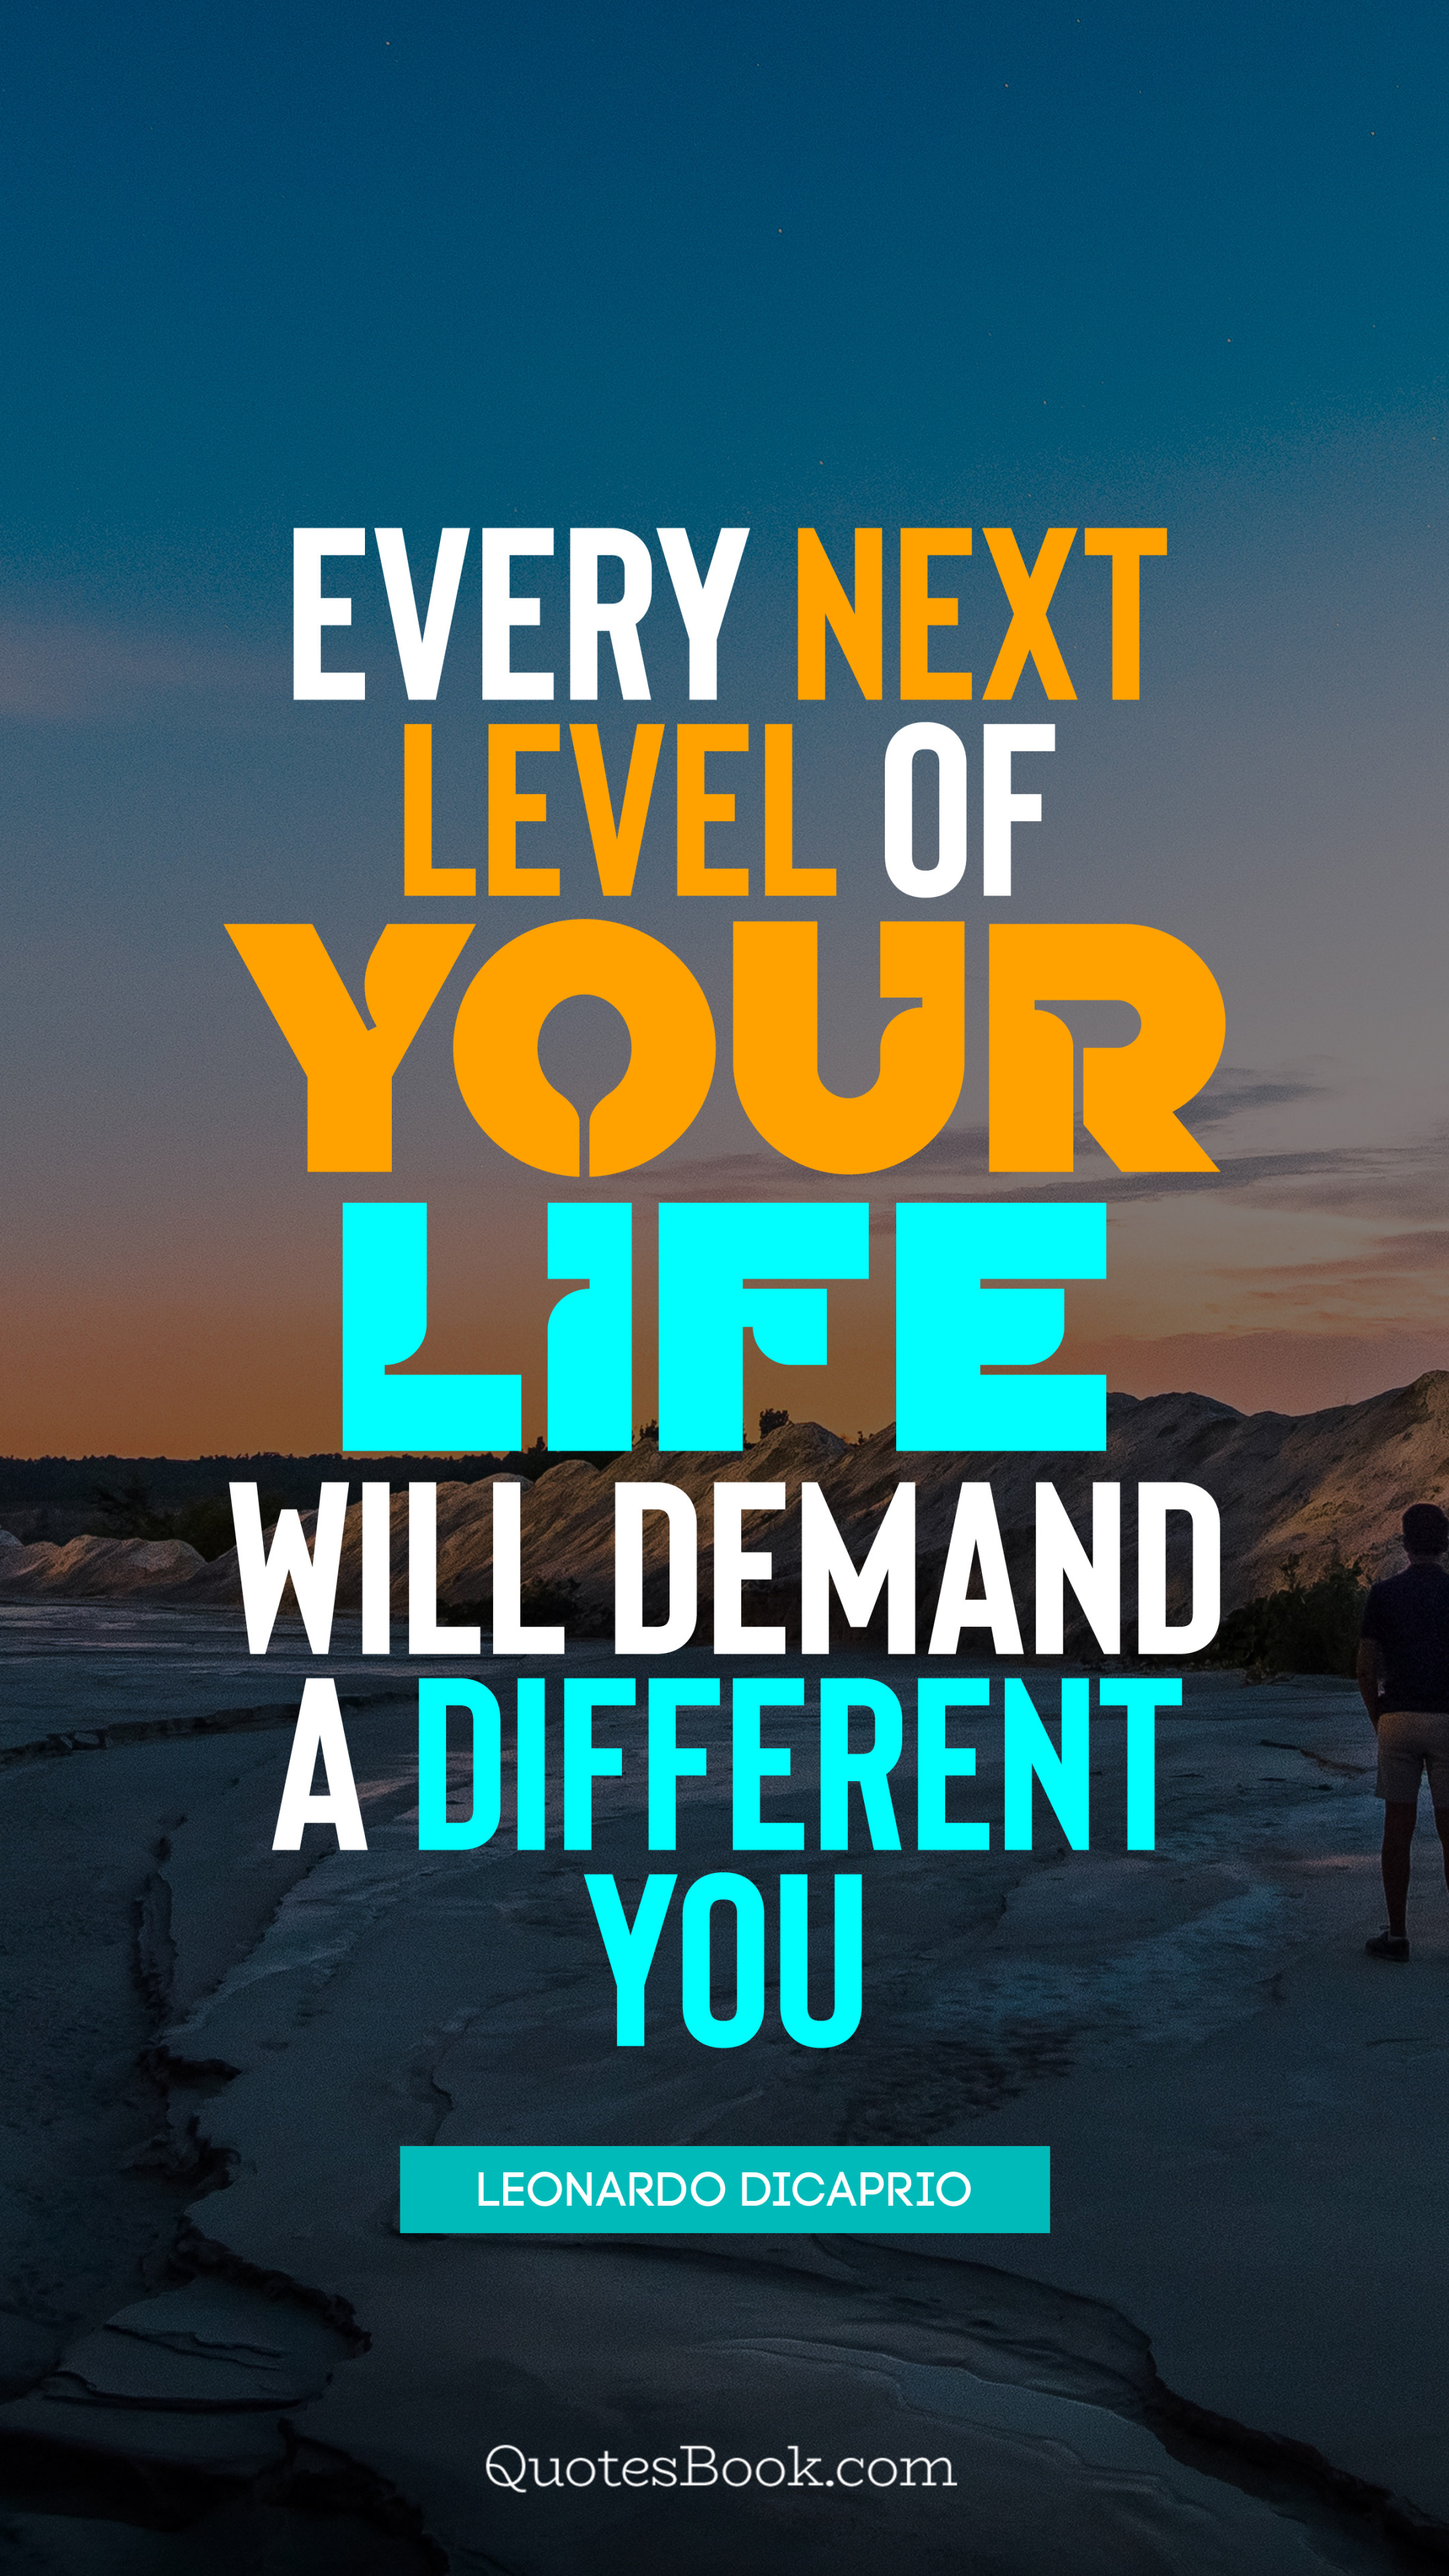 Every next level of your life will demand a different you. - Quote by